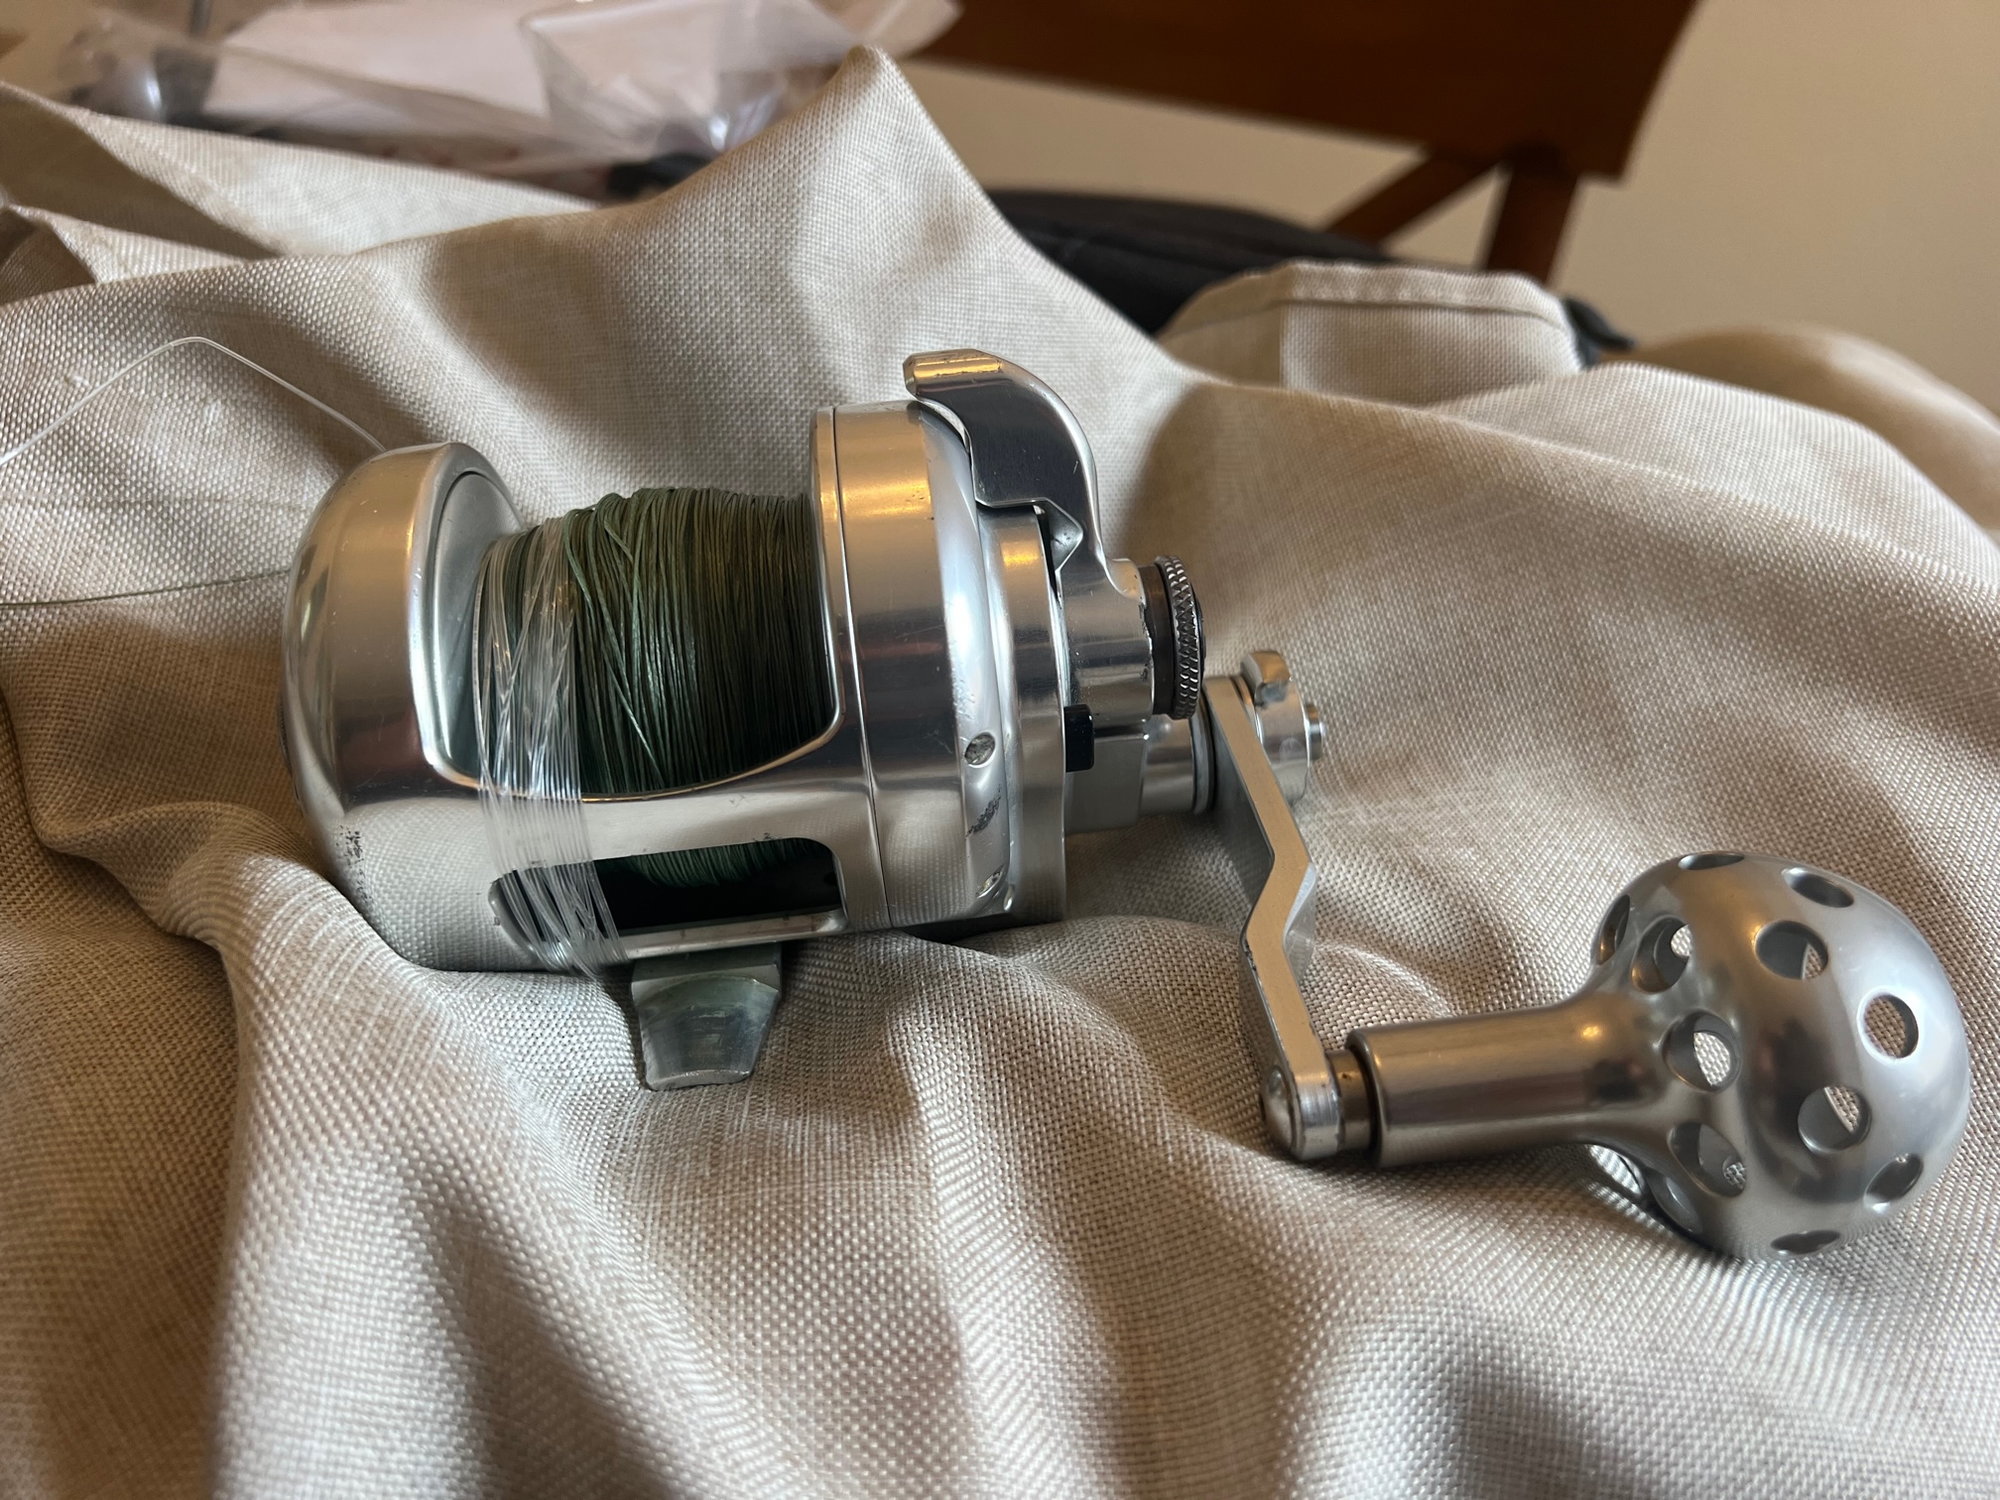 Accurate Boss Magnum Fishing Reel for Sale in Glendora, CA - OfferUp